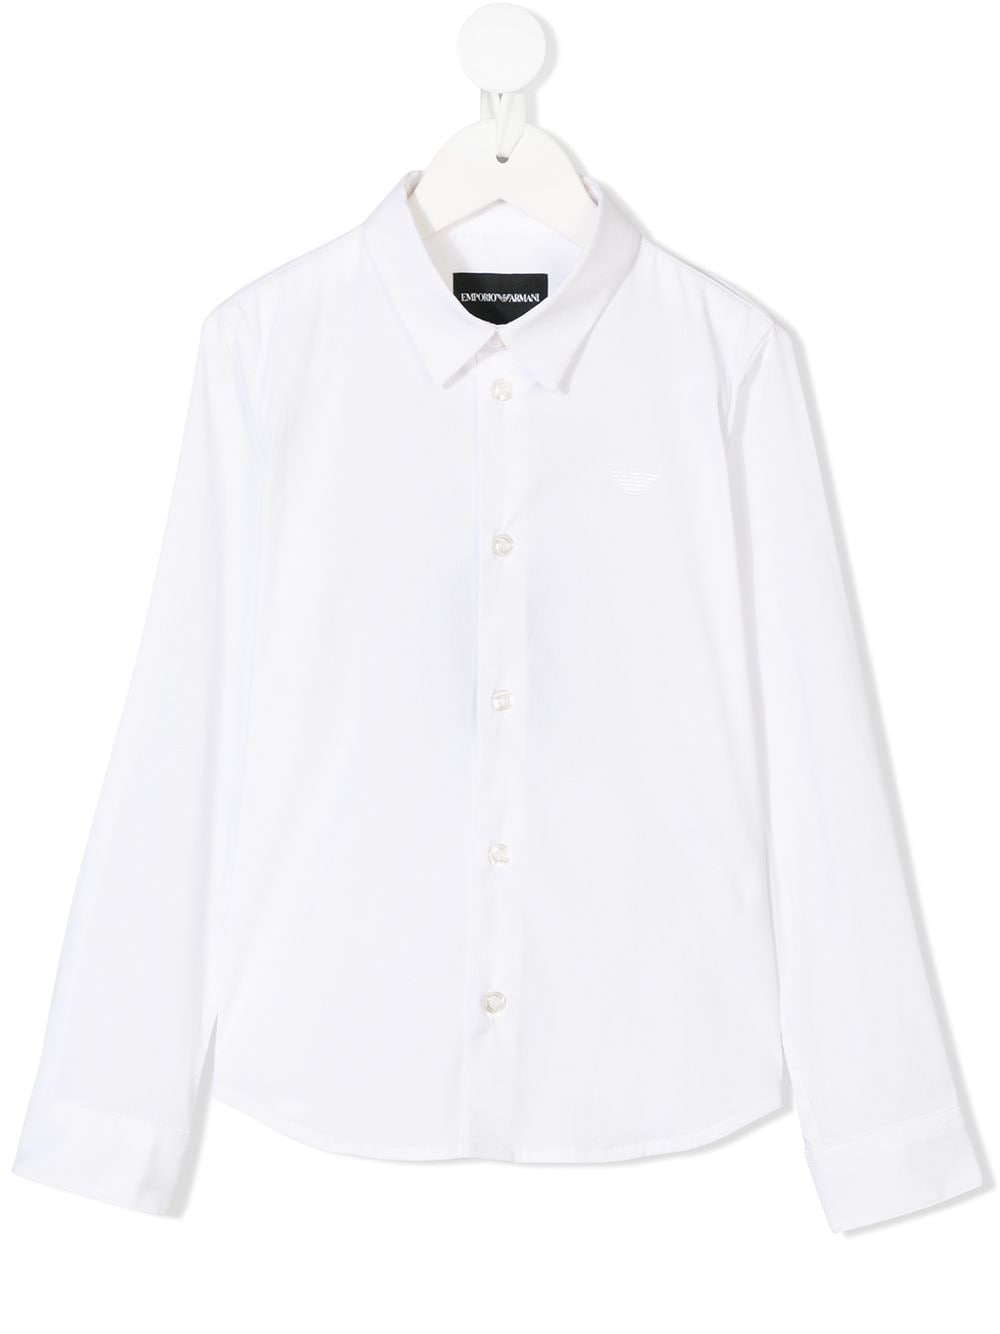 Image 1 of Emporio Armani Kids classic buttoned shirt